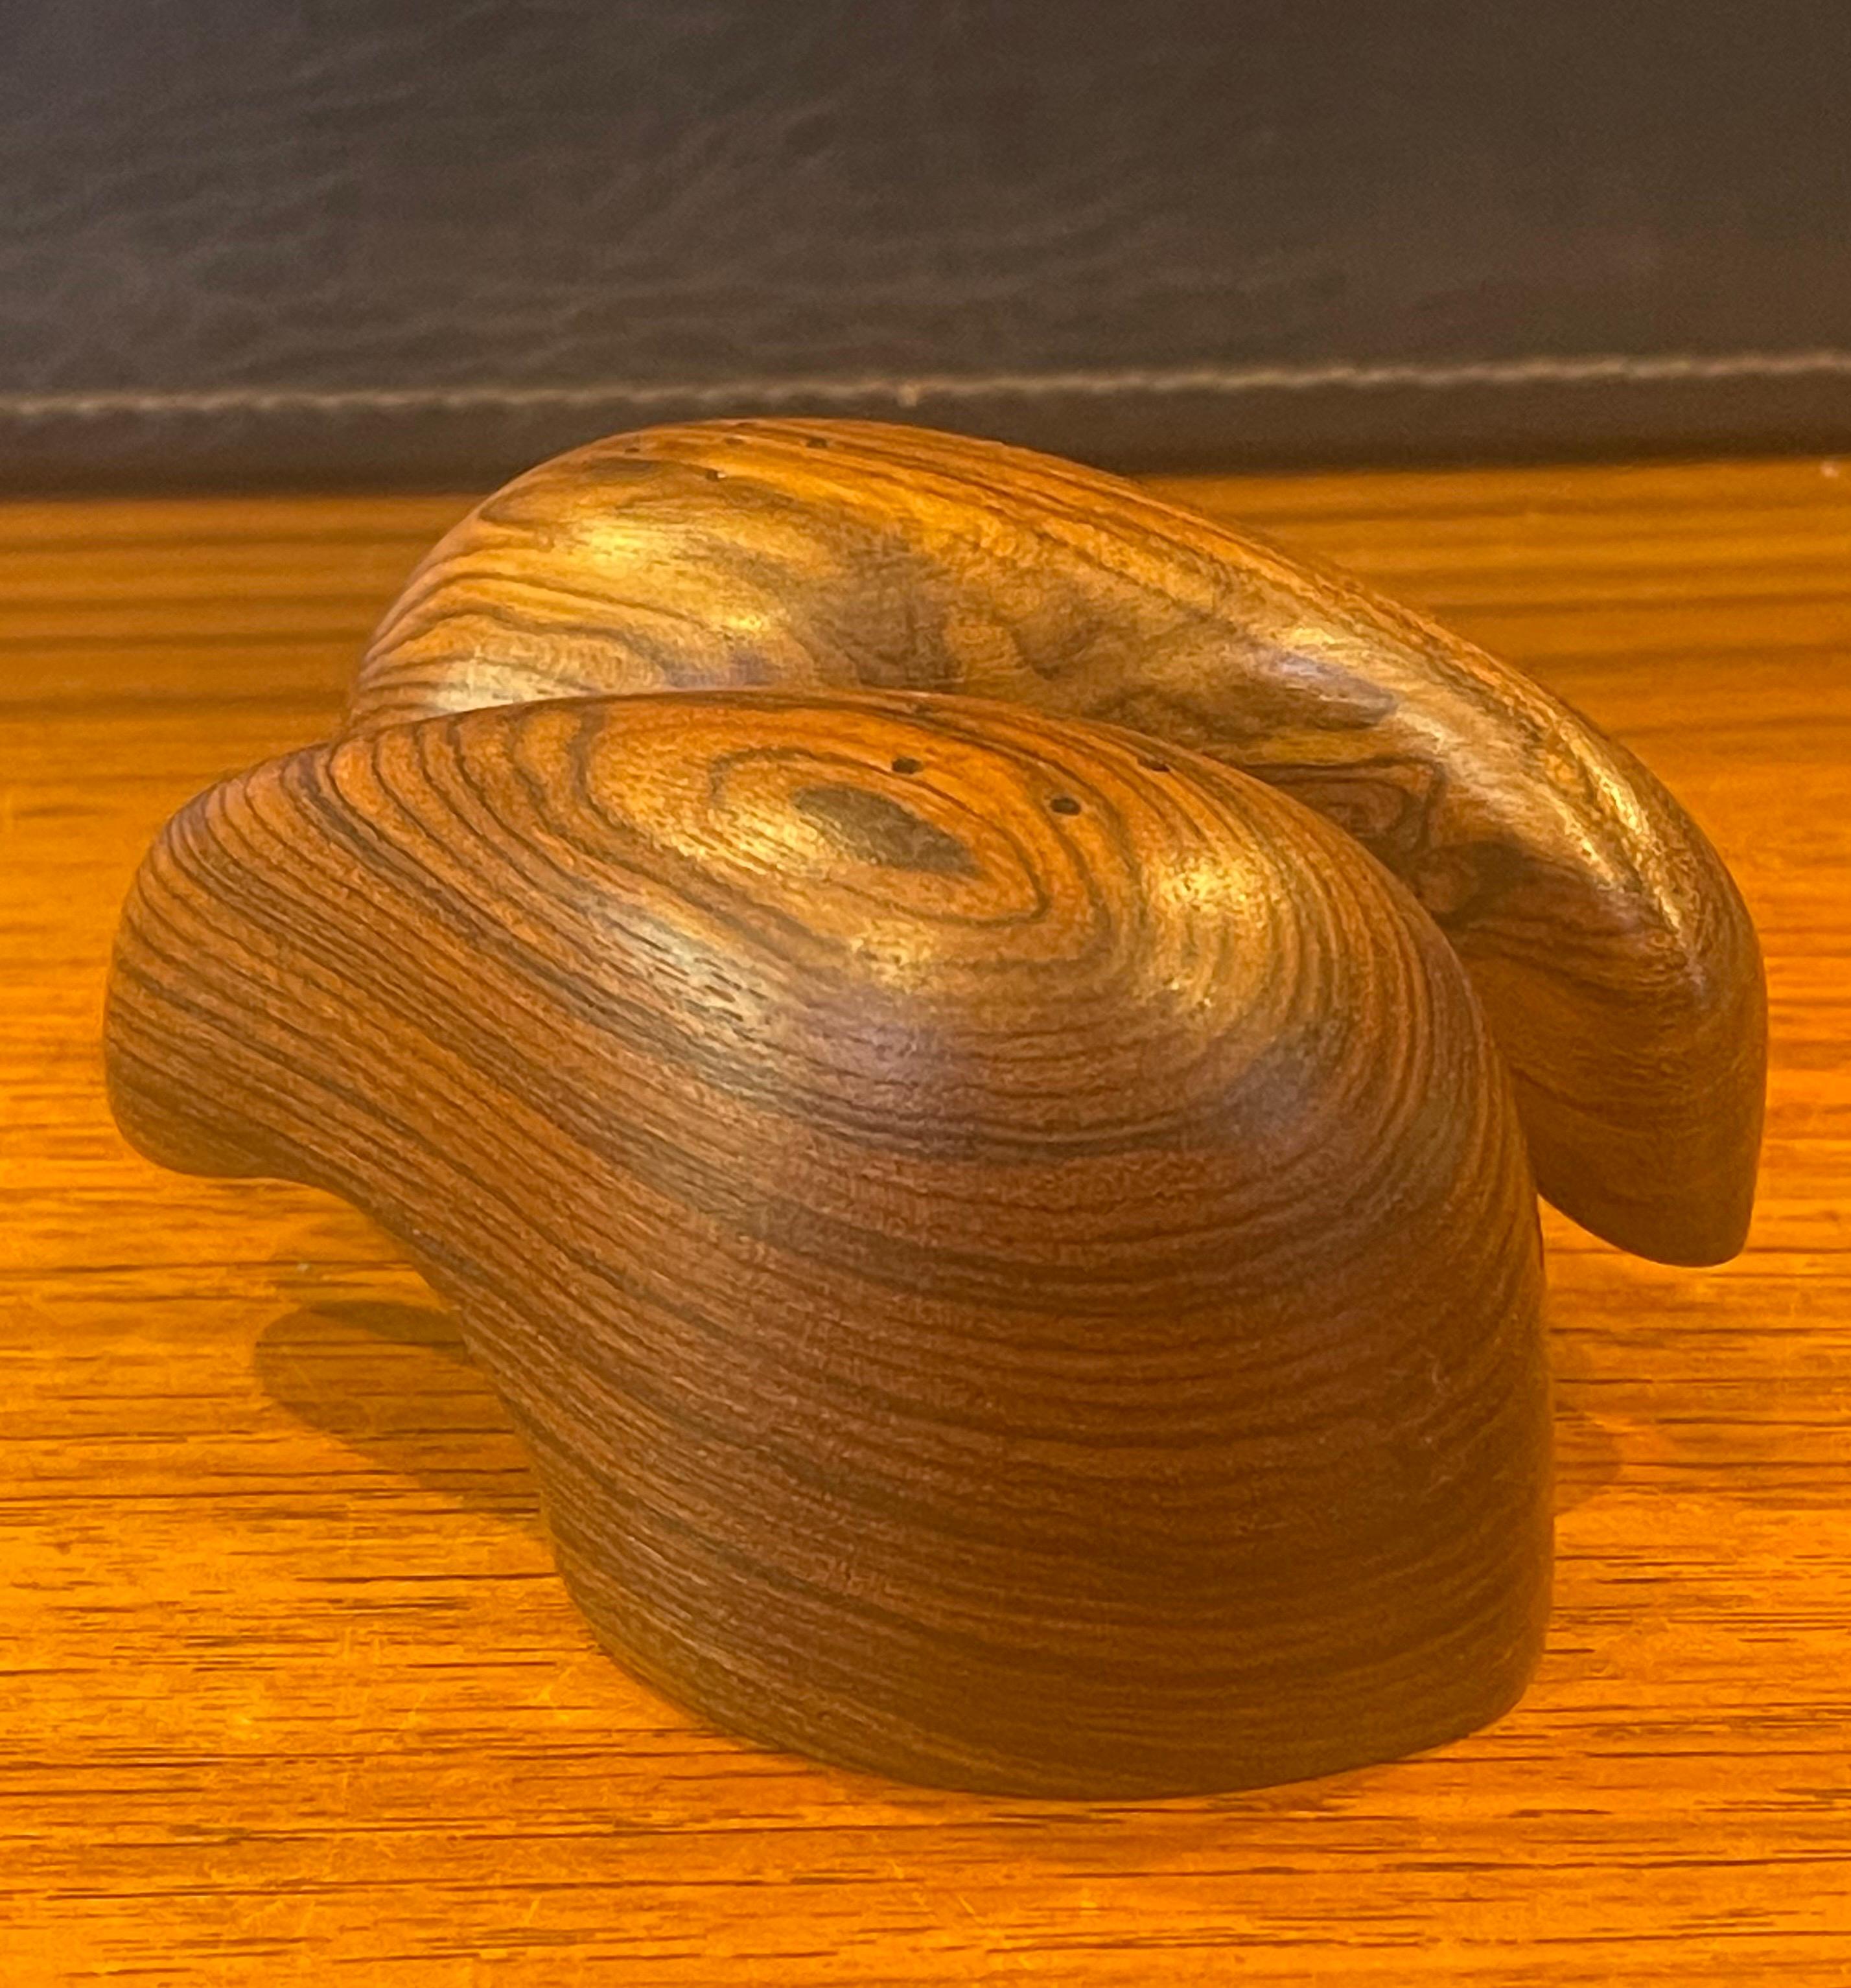 Pair of MCM Cocobolo Wood Minimalist Salt & Pepper Shakers by Don Shoemaker In Good Condition For Sale In San Diego, CA